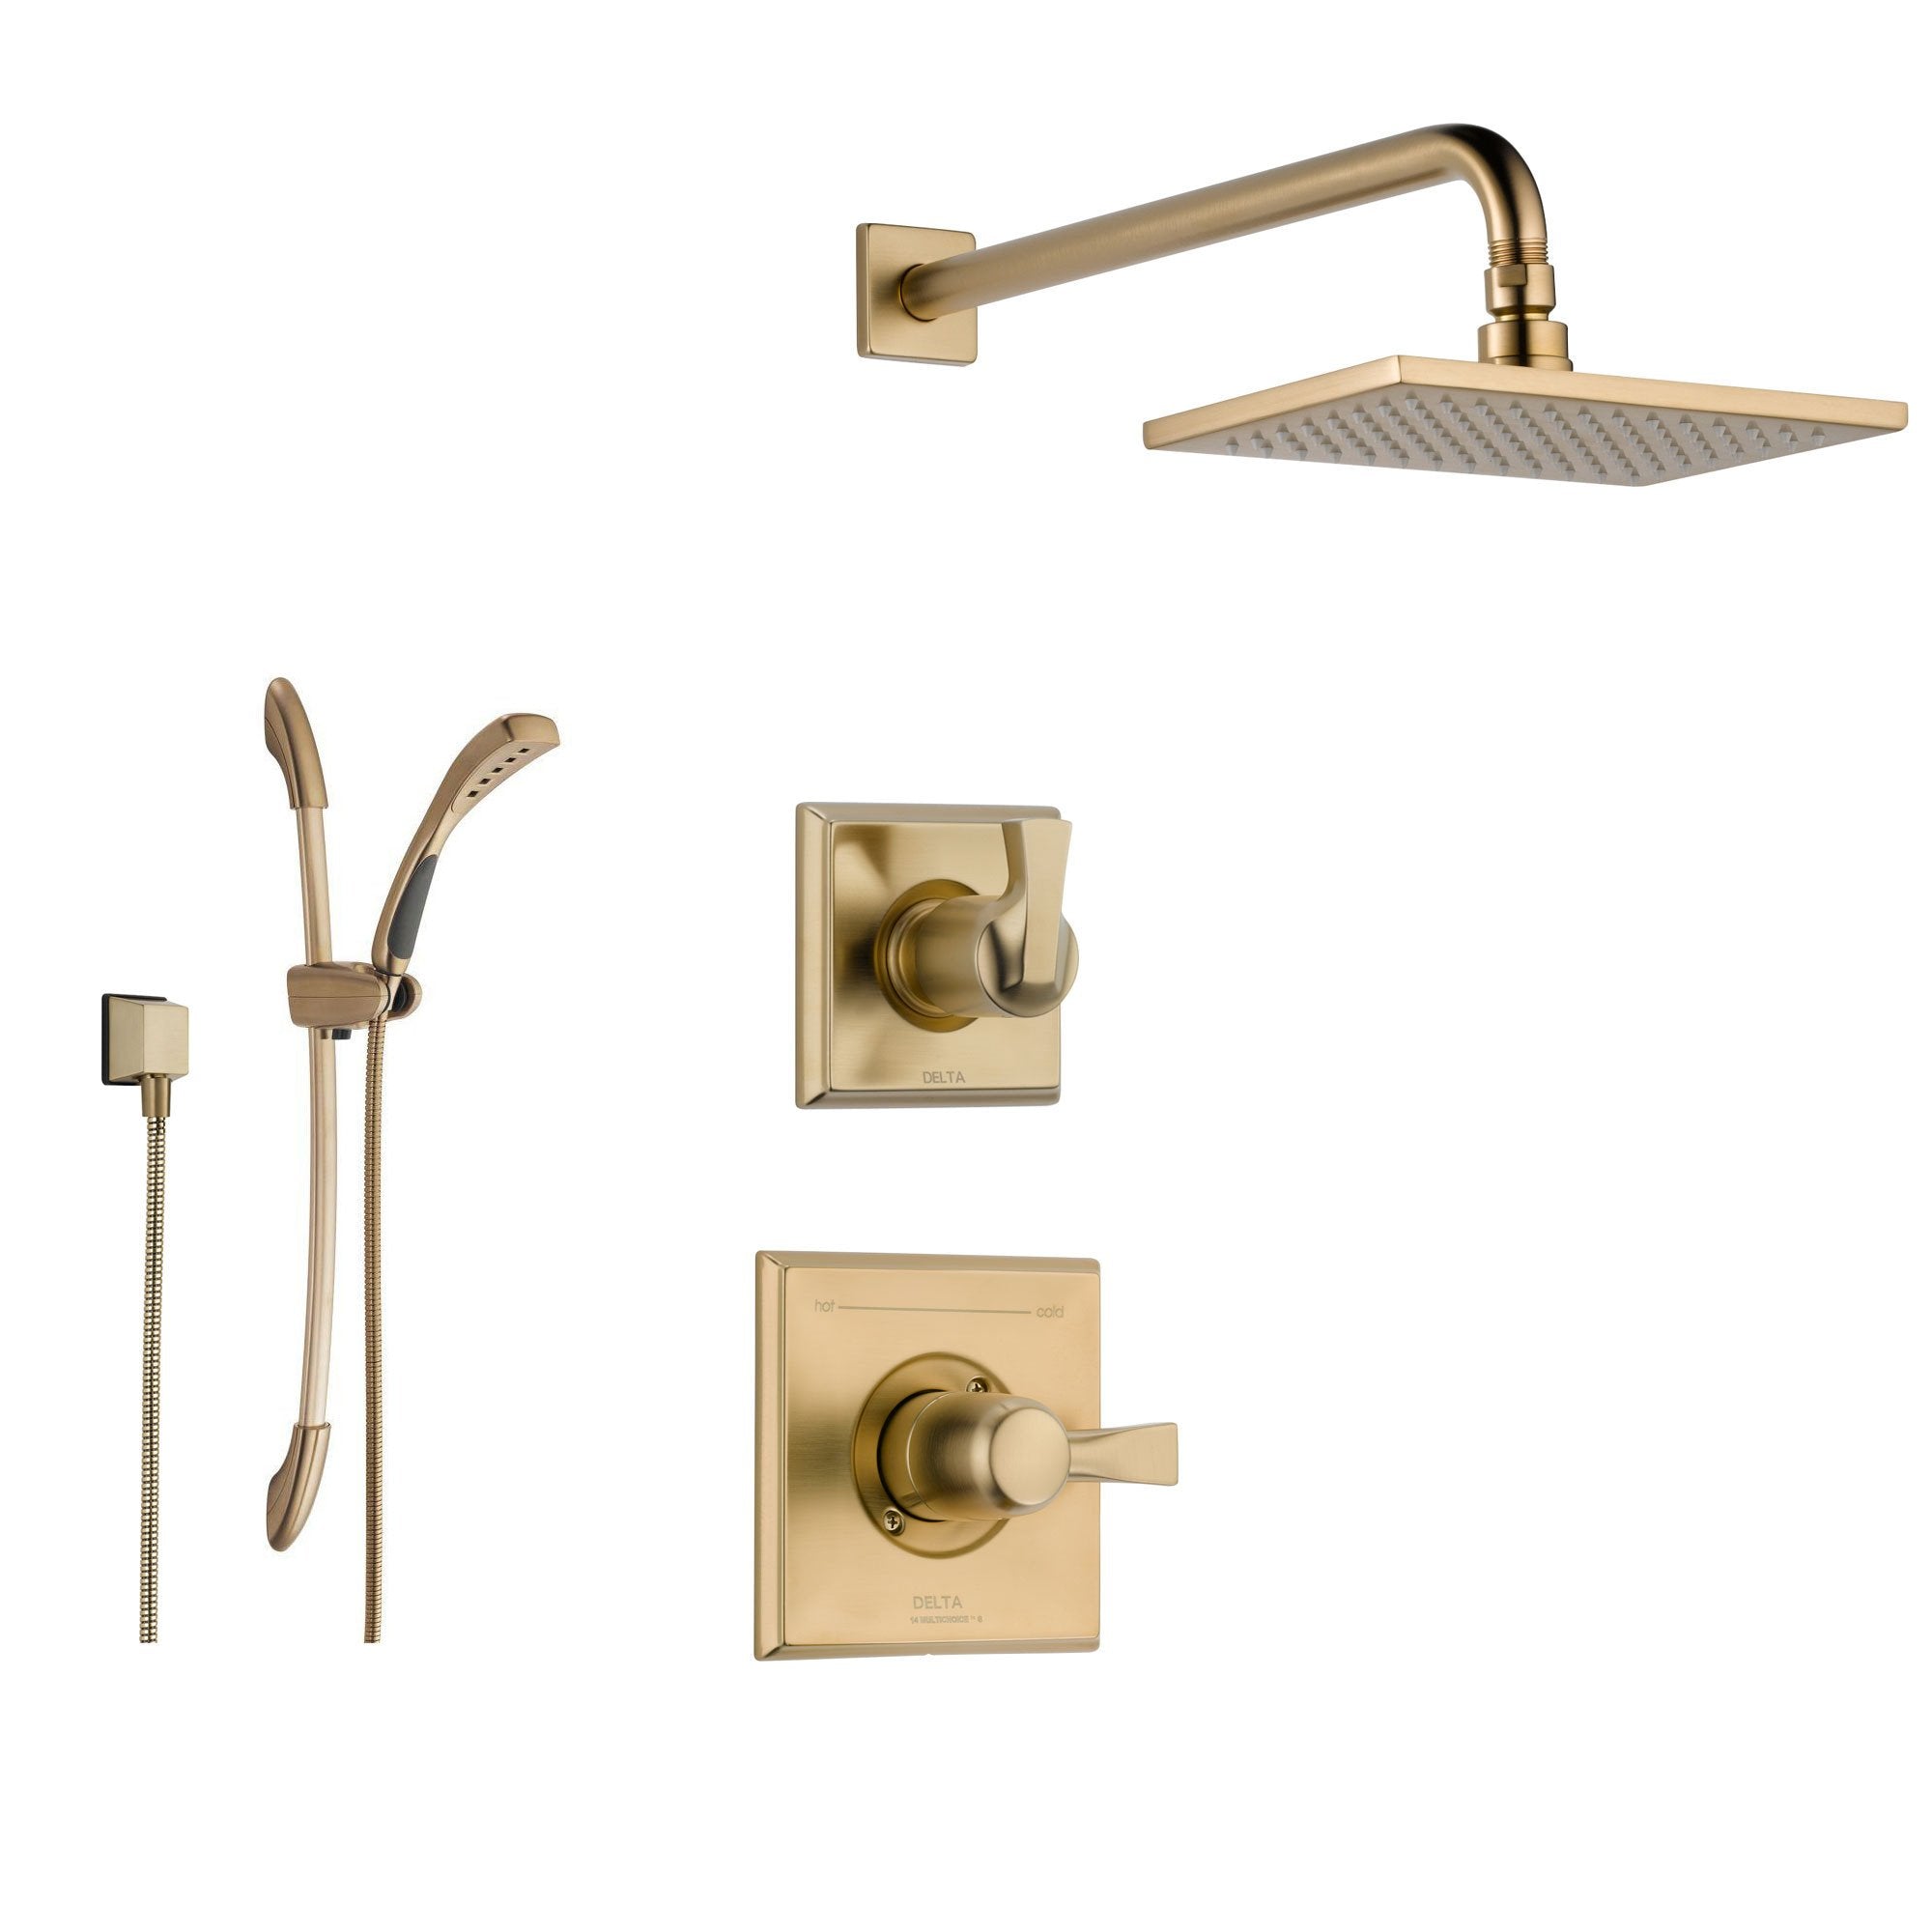 Delta Dryden Champagne Bronze Shower System with Normal Shower Handle, 3-setting Diverter, Large Square Rain Shower Head, and Hand Shower Spray SS145183CZ